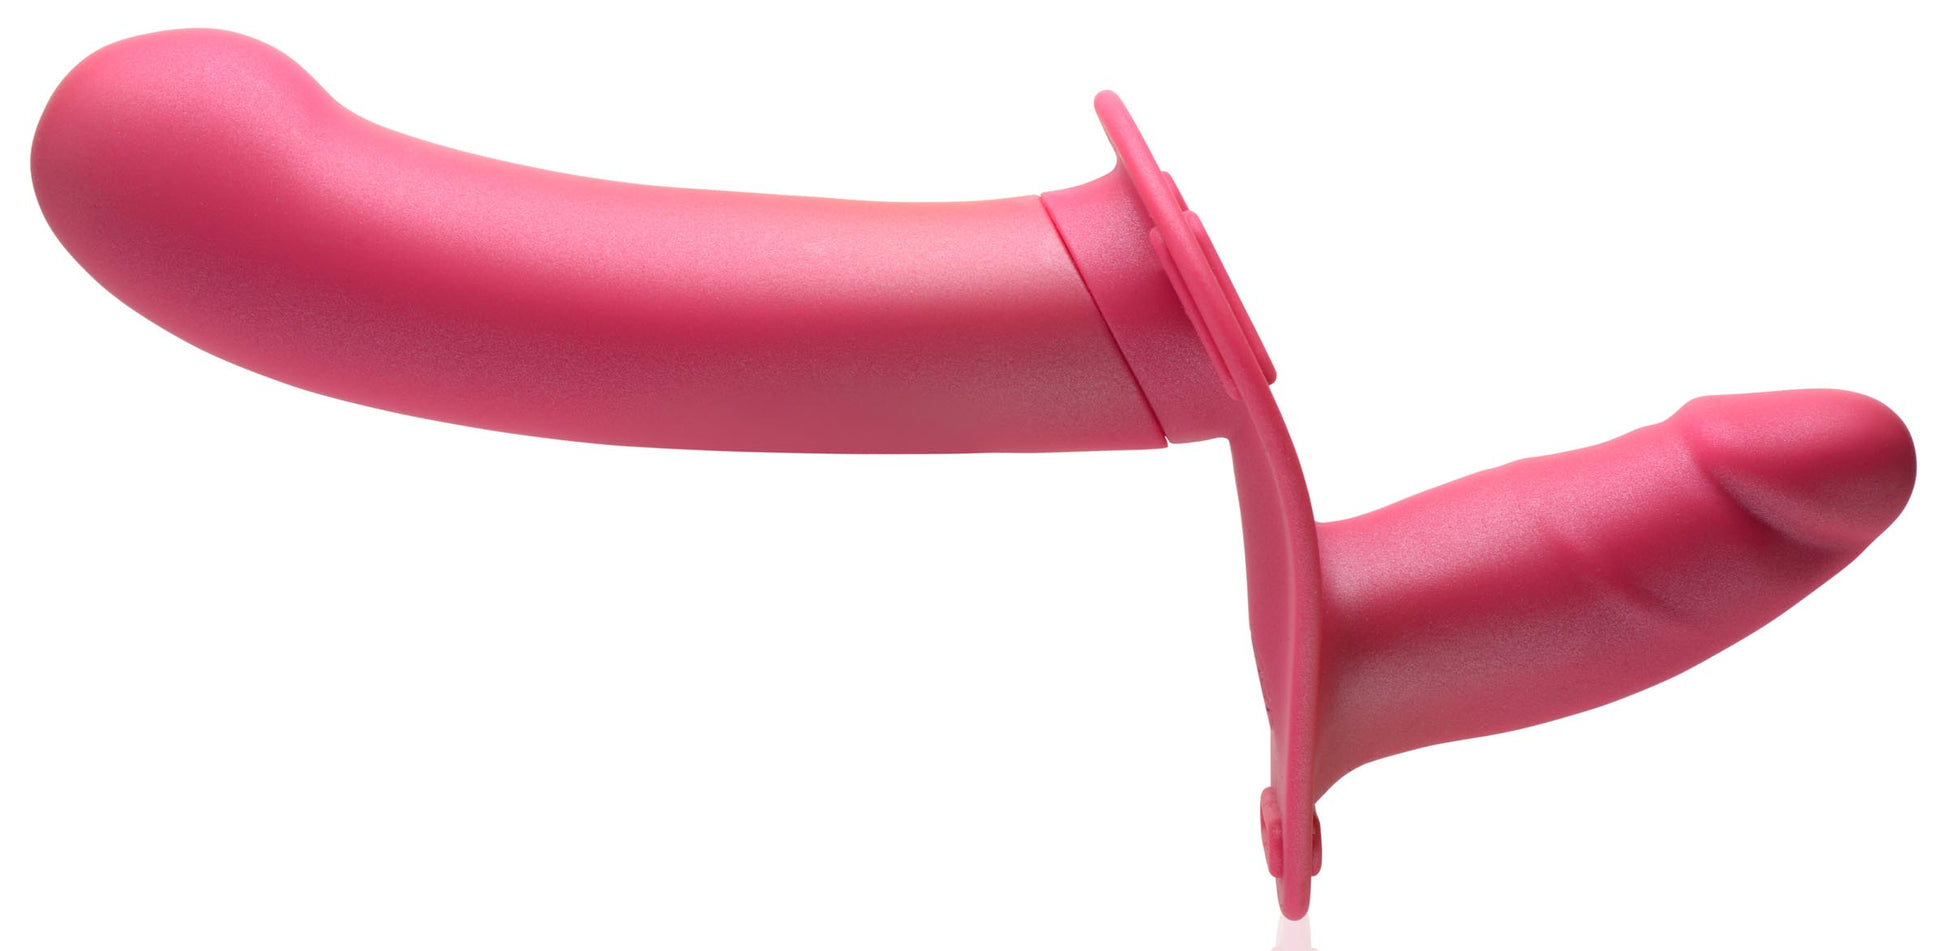 28X Double Diva 1.5 Inch Double Dildo with Harness and Remote Control - Pink - UABDSM